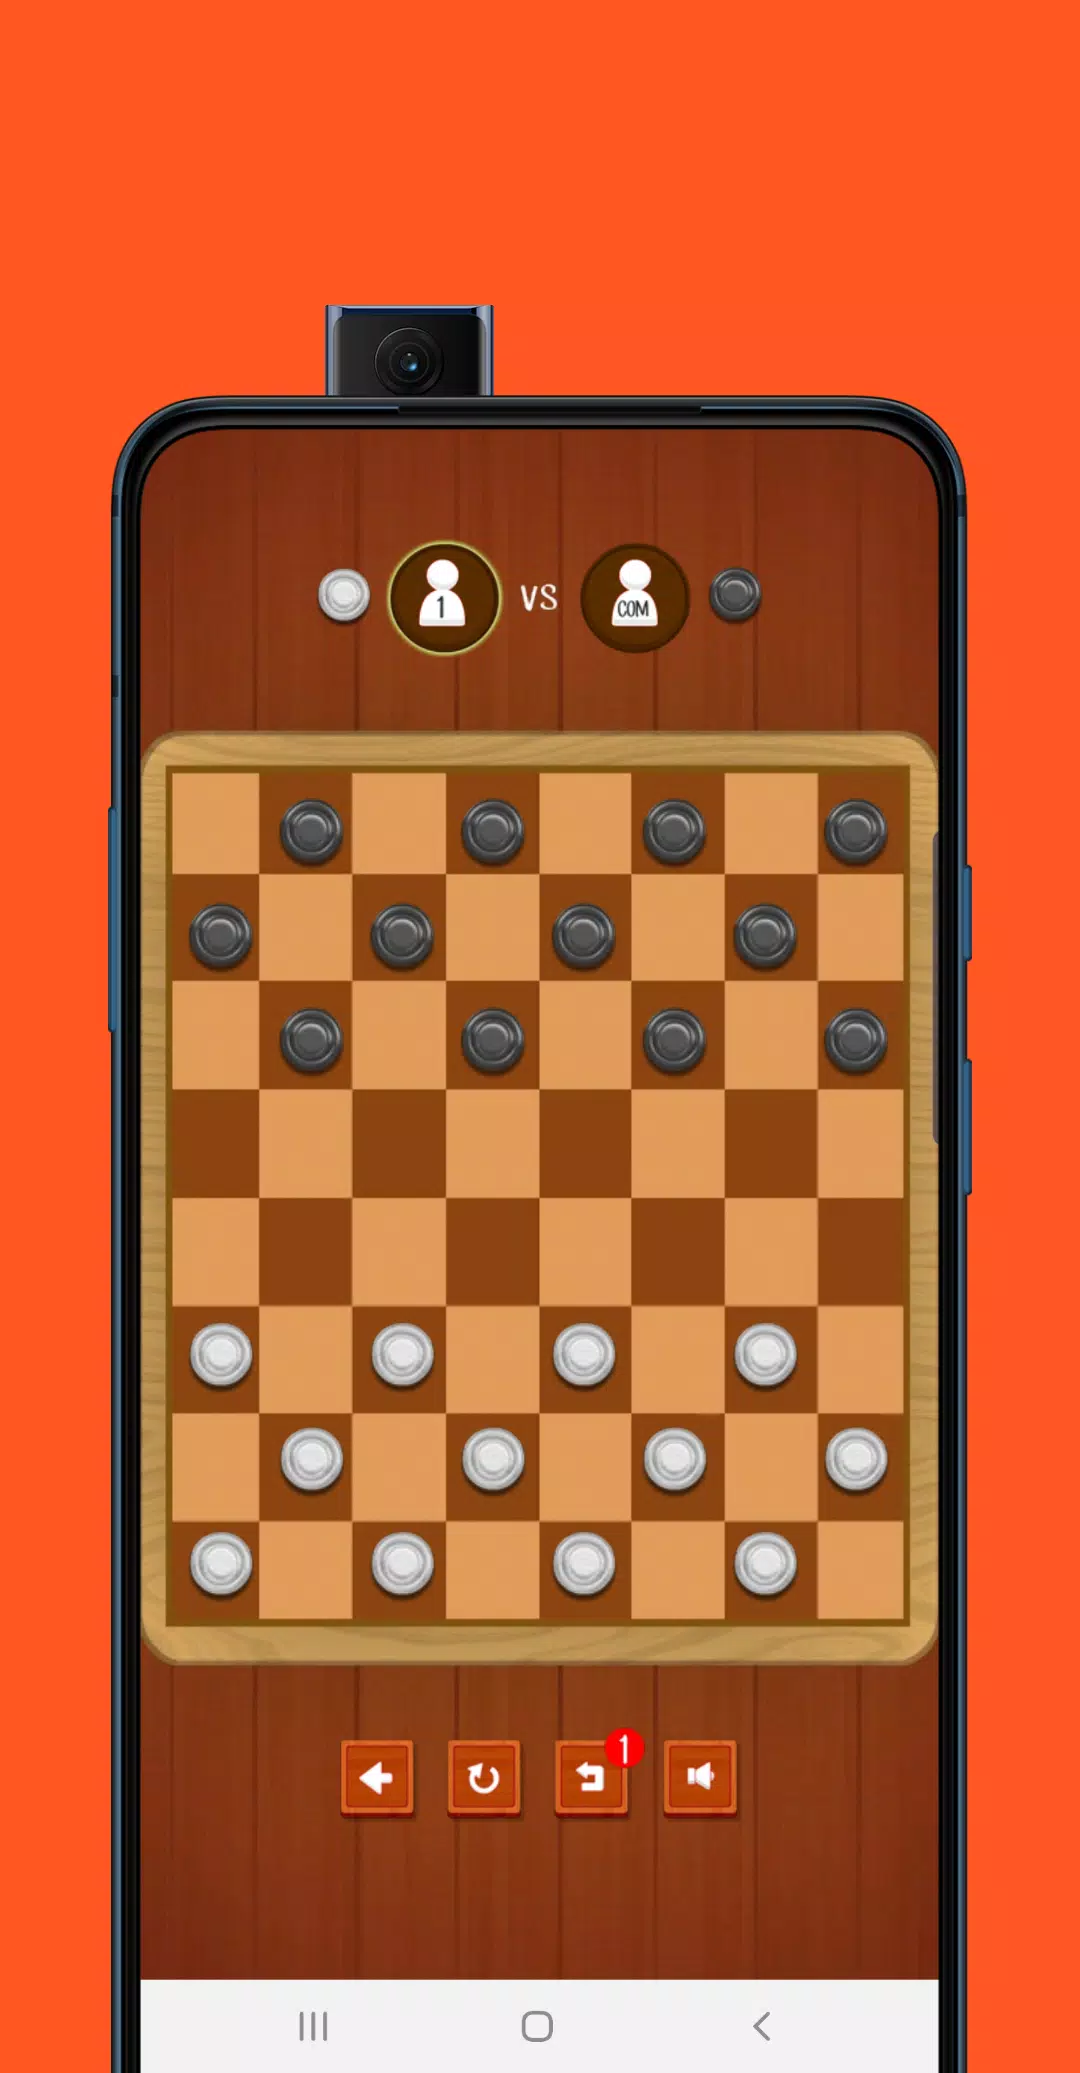 ♟️Chess Titans 3D: free offline game APK (Android Game) - Free Download